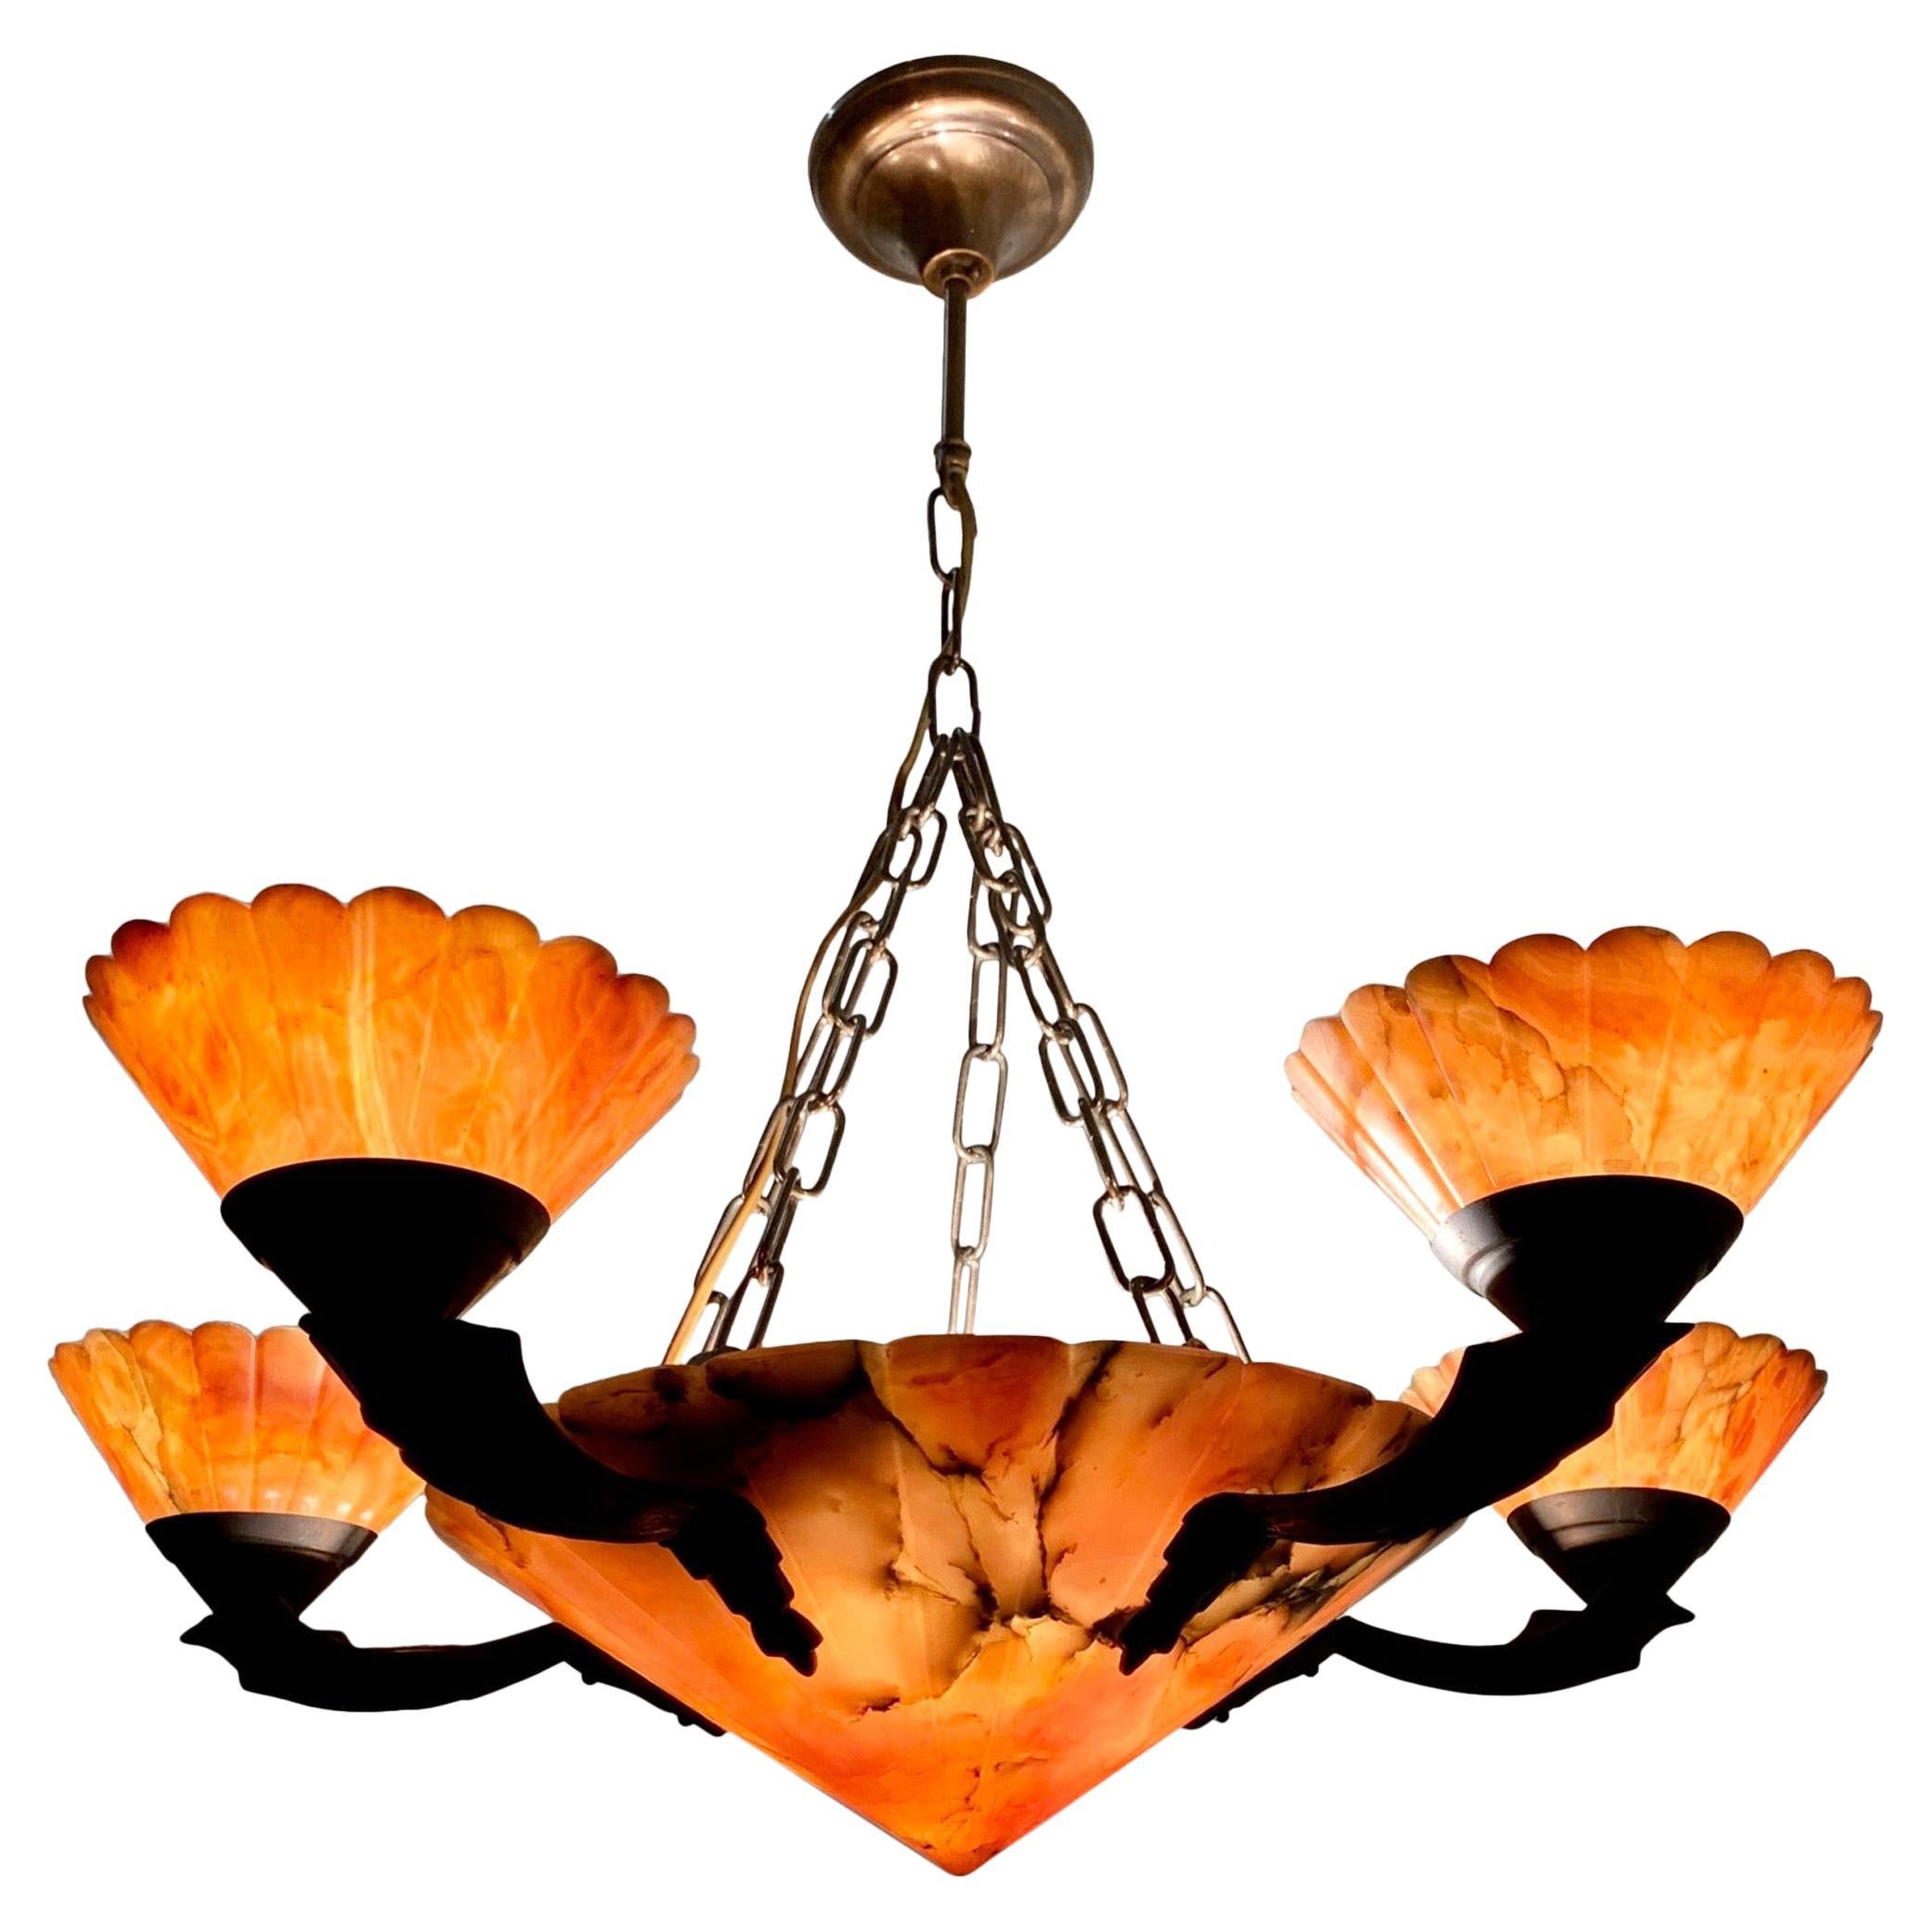 Highly stylish Art Deco pendant for a great atmosphere.

If you are looking for the perfect chandelier (both in design and condition) to grace your dining area then this truly stylish Art Deco light fixture could be yours to own and enjoy soon. The